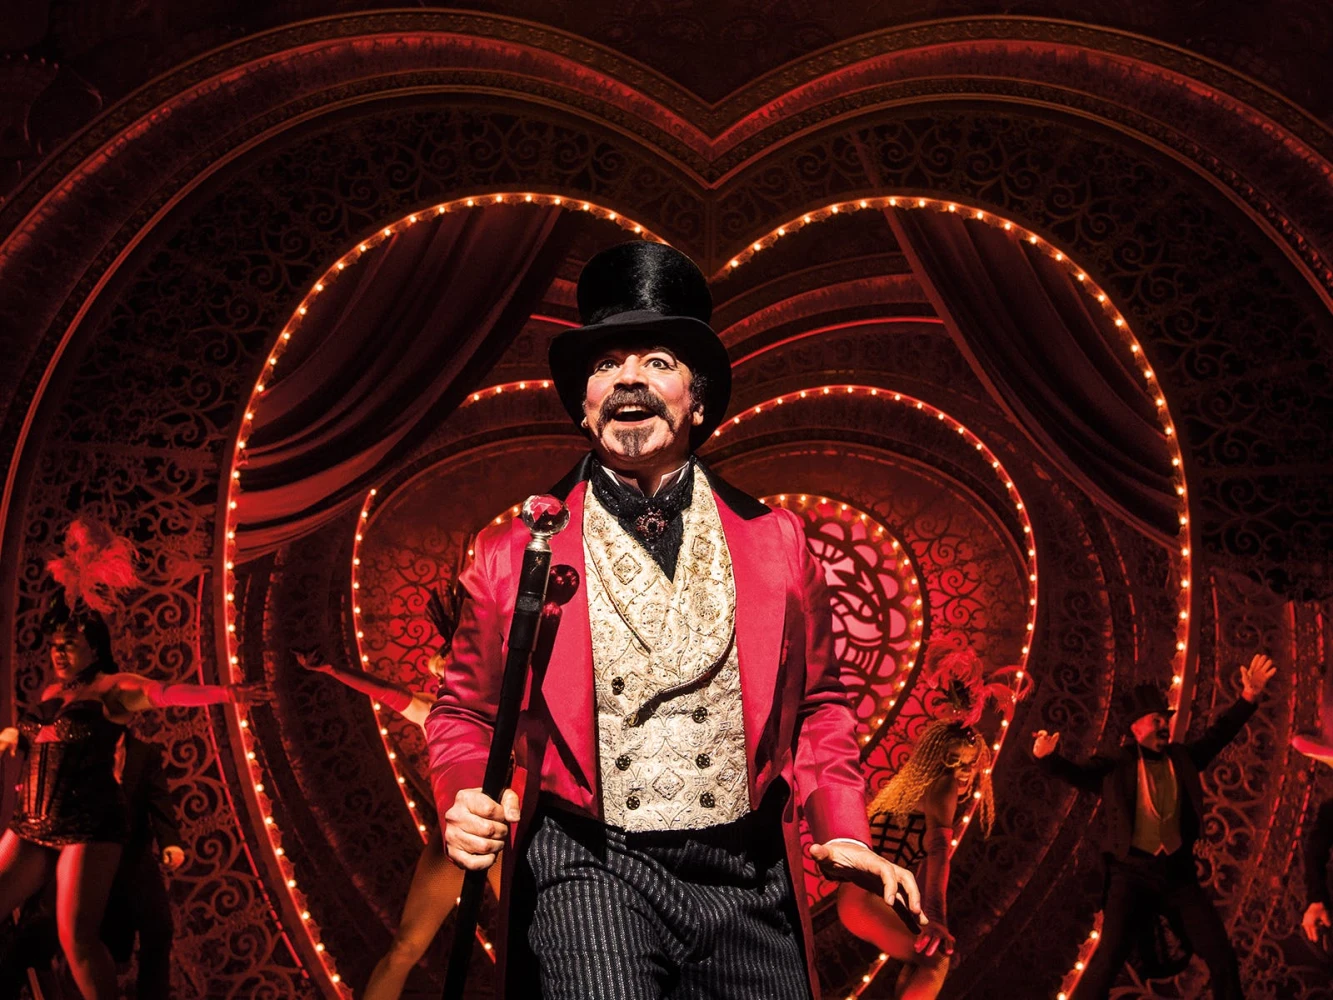 Moulin Rouge! The Musical: What to expect - 7